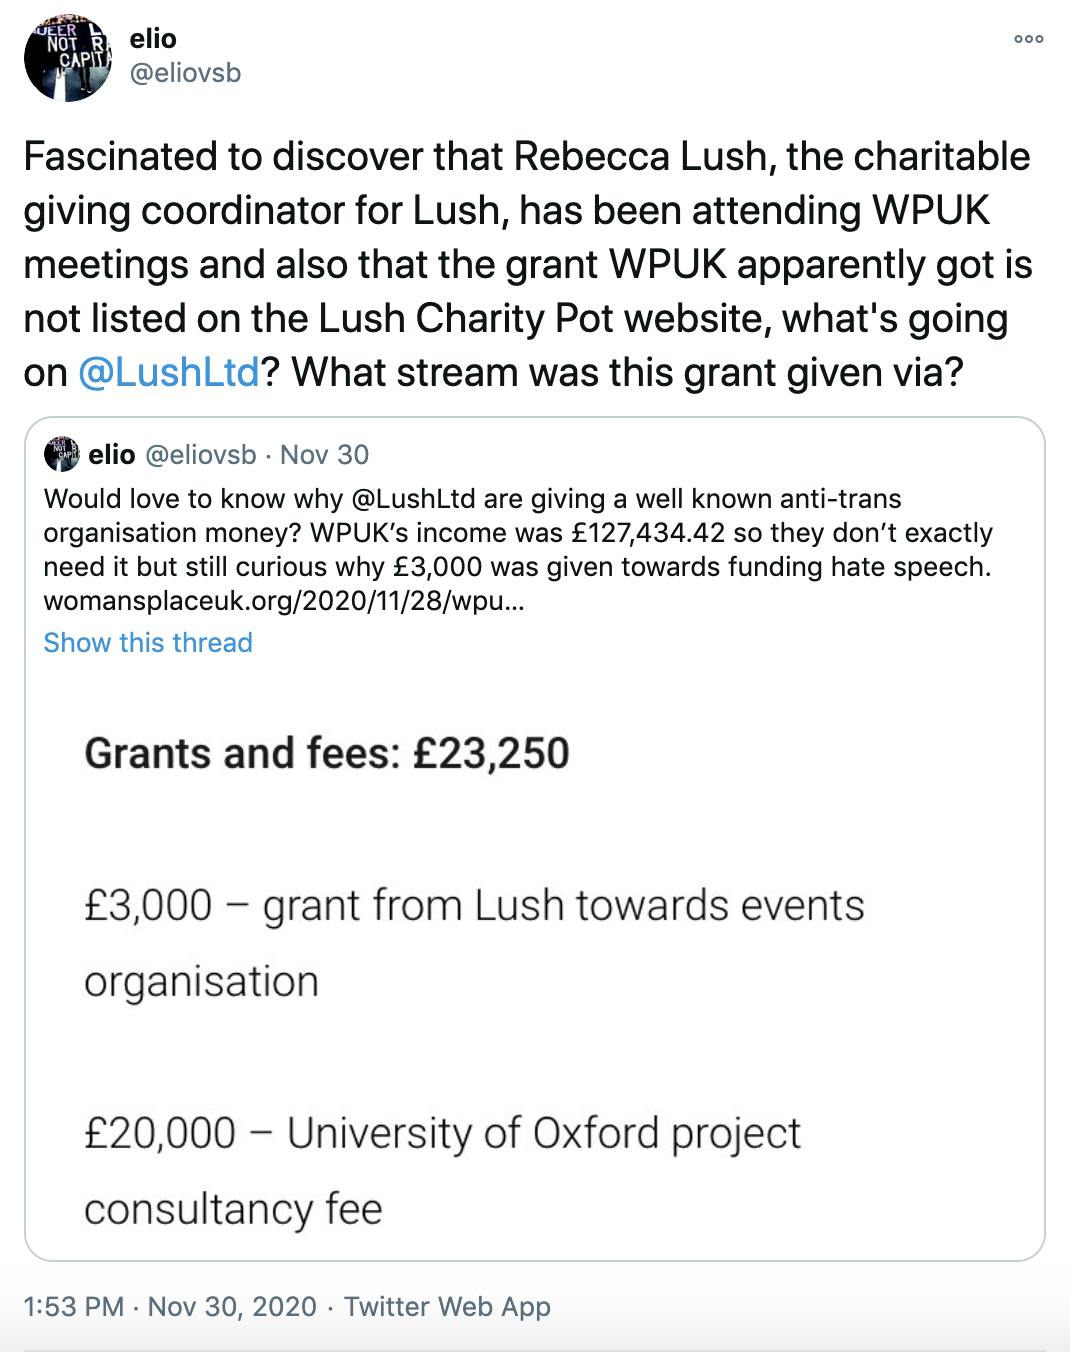 Fascinated to discover that Rebecca Lush, the charitable giving coordinator for Lush, has been attending WPUK meetings and also that the grant WPUK apparently got is not listed on the Lush Charity Pot website, what's going on @LushLtd ? What stream was this grant given via?